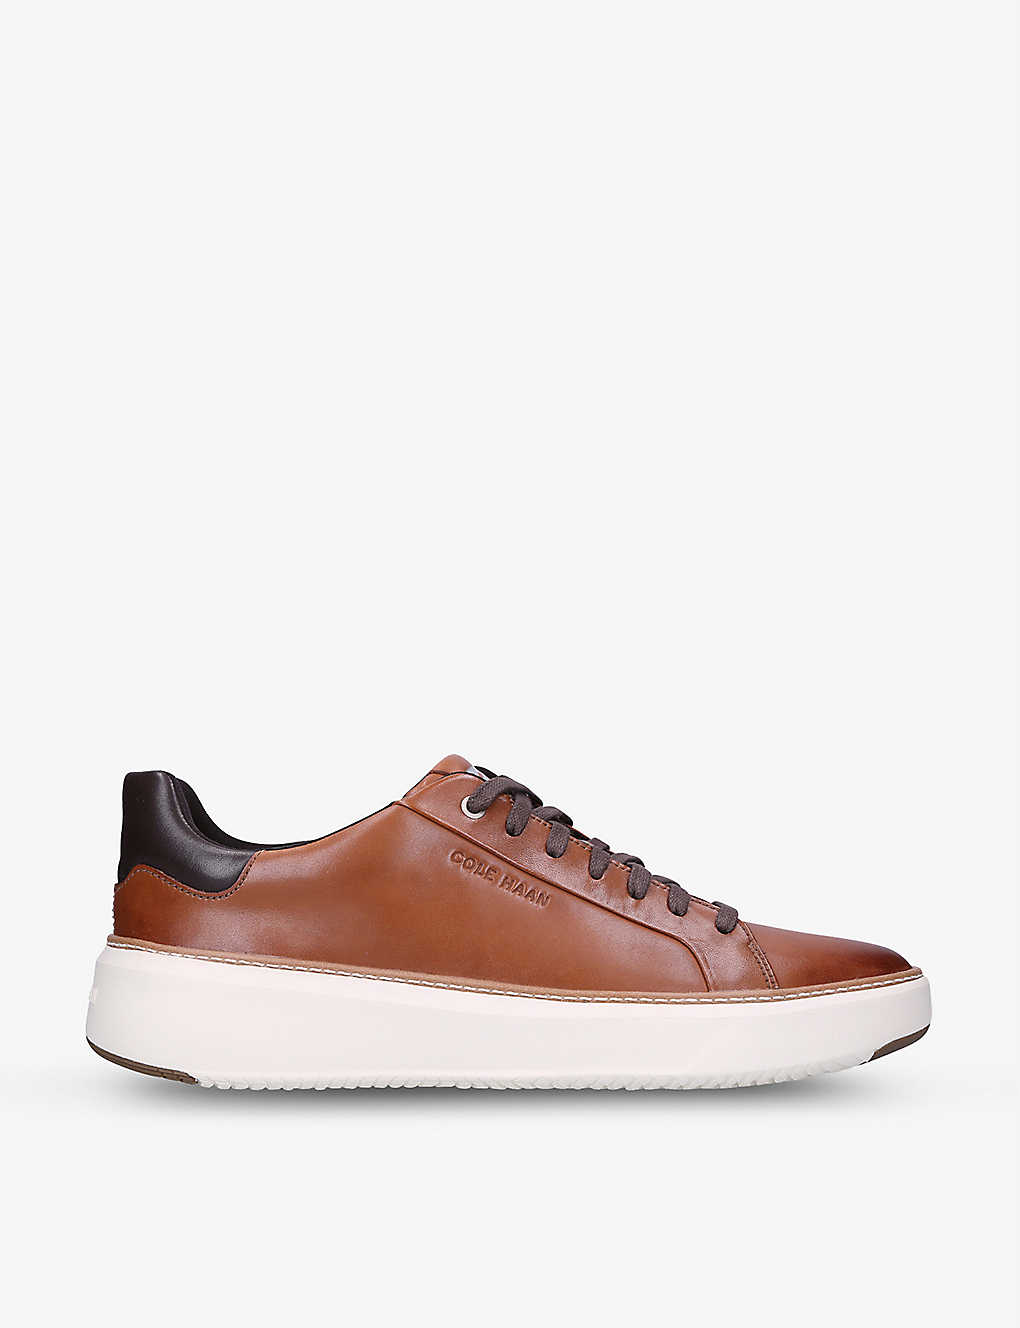 Shop Cole Haan Mens Tan Comb Grandprø Topspin Leather Trainers